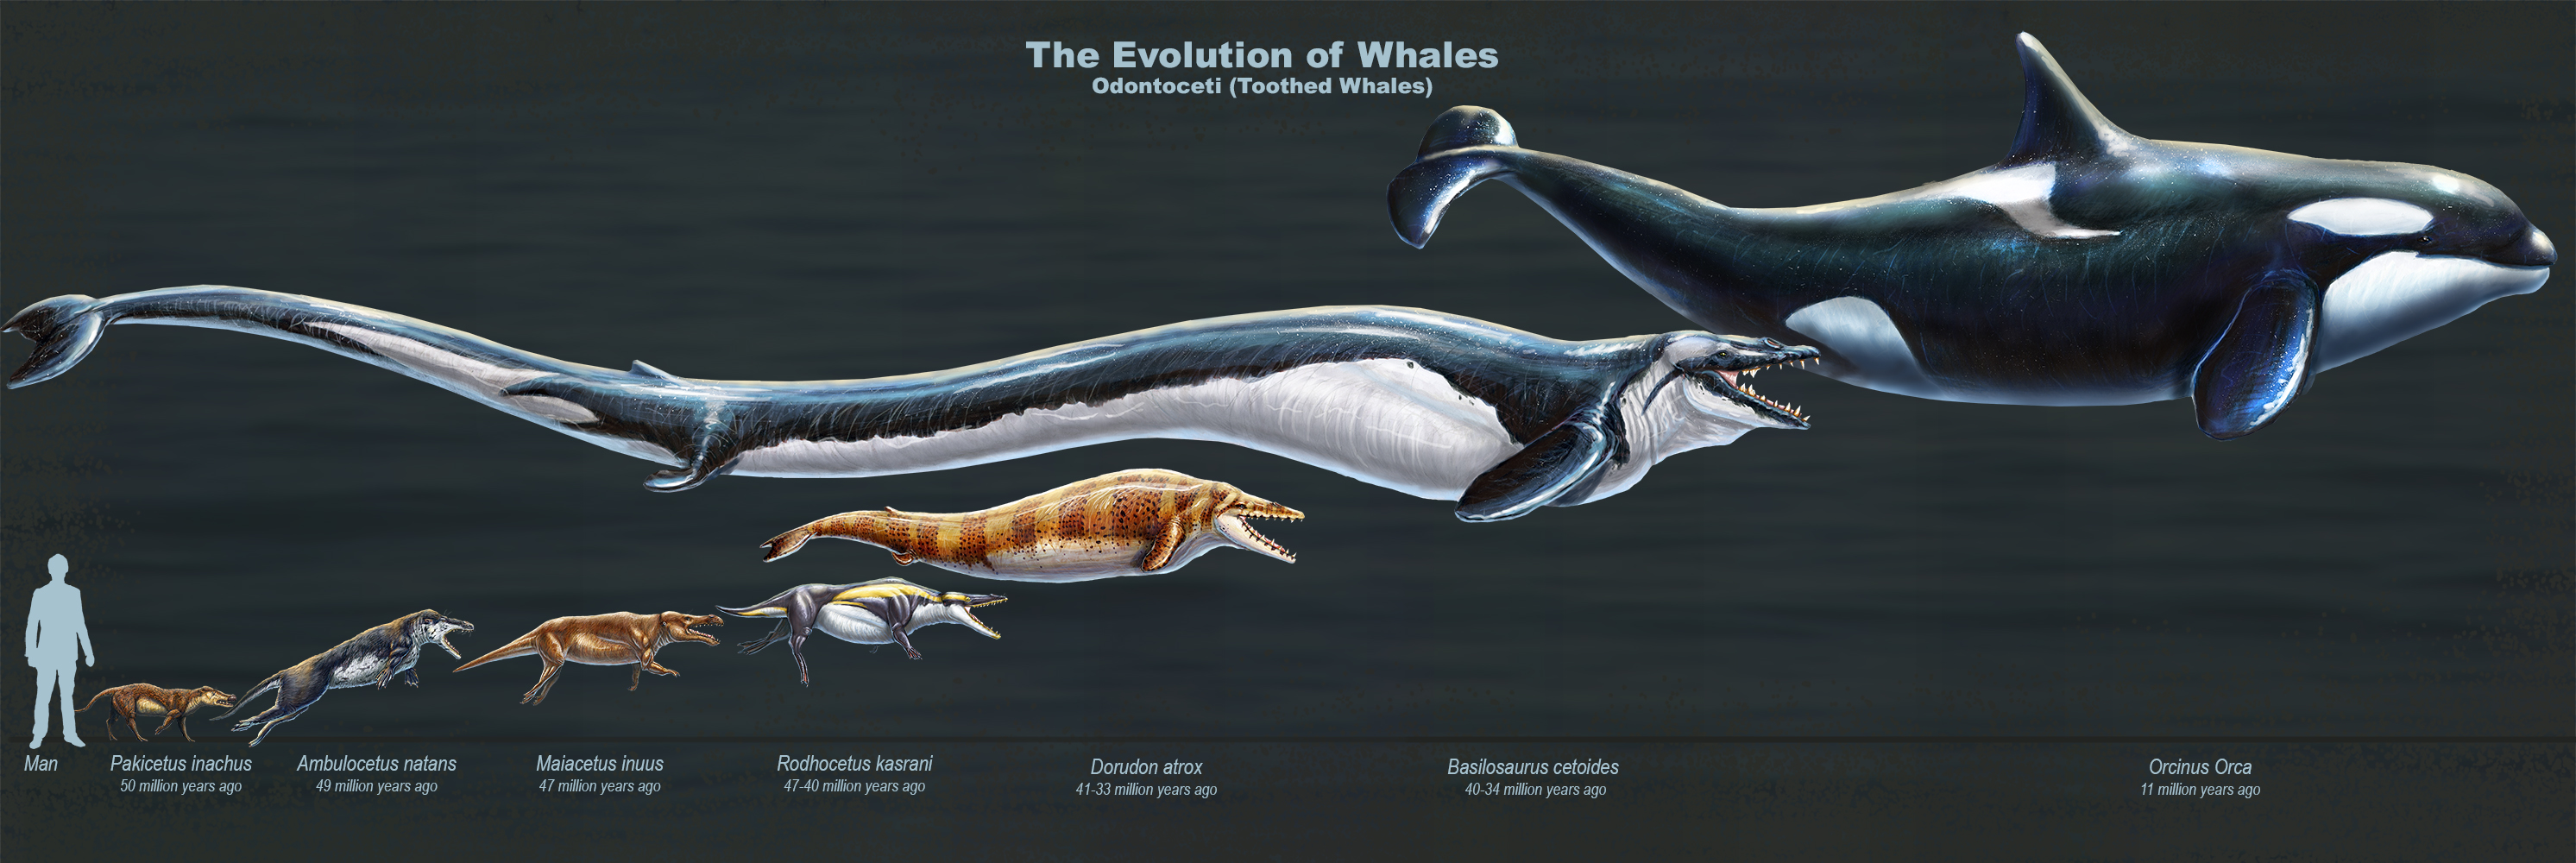 This is the evolve of a terrestrial animal to the Vales, while they moved to live in water, during million years.  